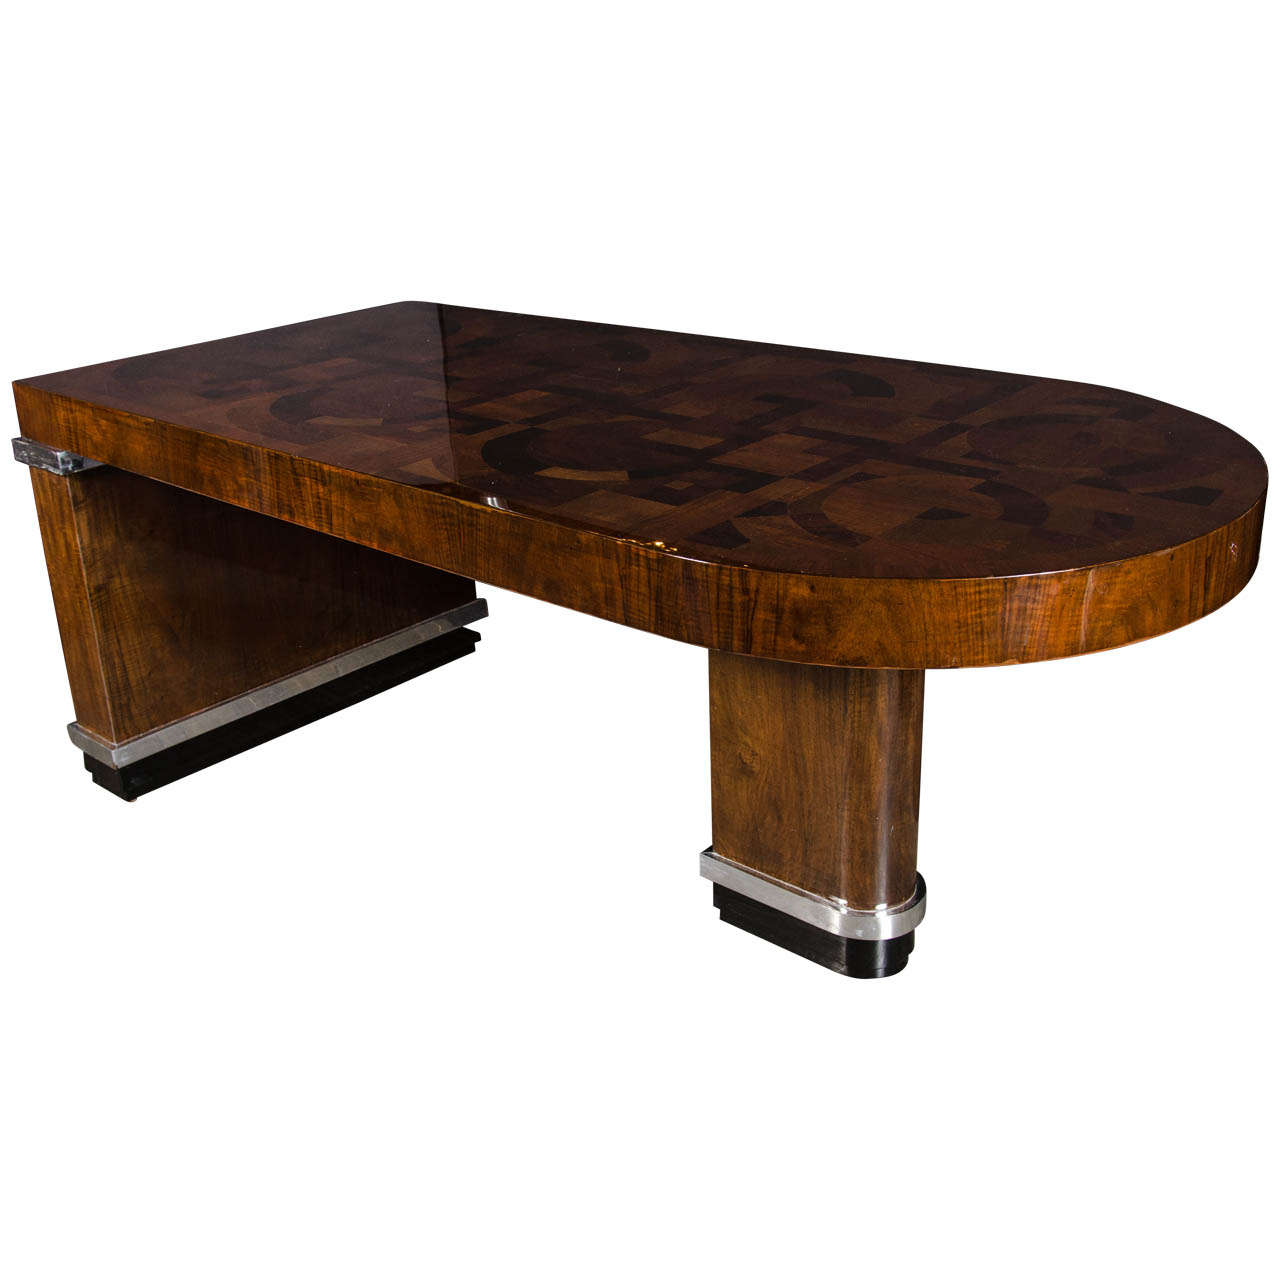 Outstanding and Exquisite Art Deco Inlaid Exotic Wood Bullet Desk/Dining Table